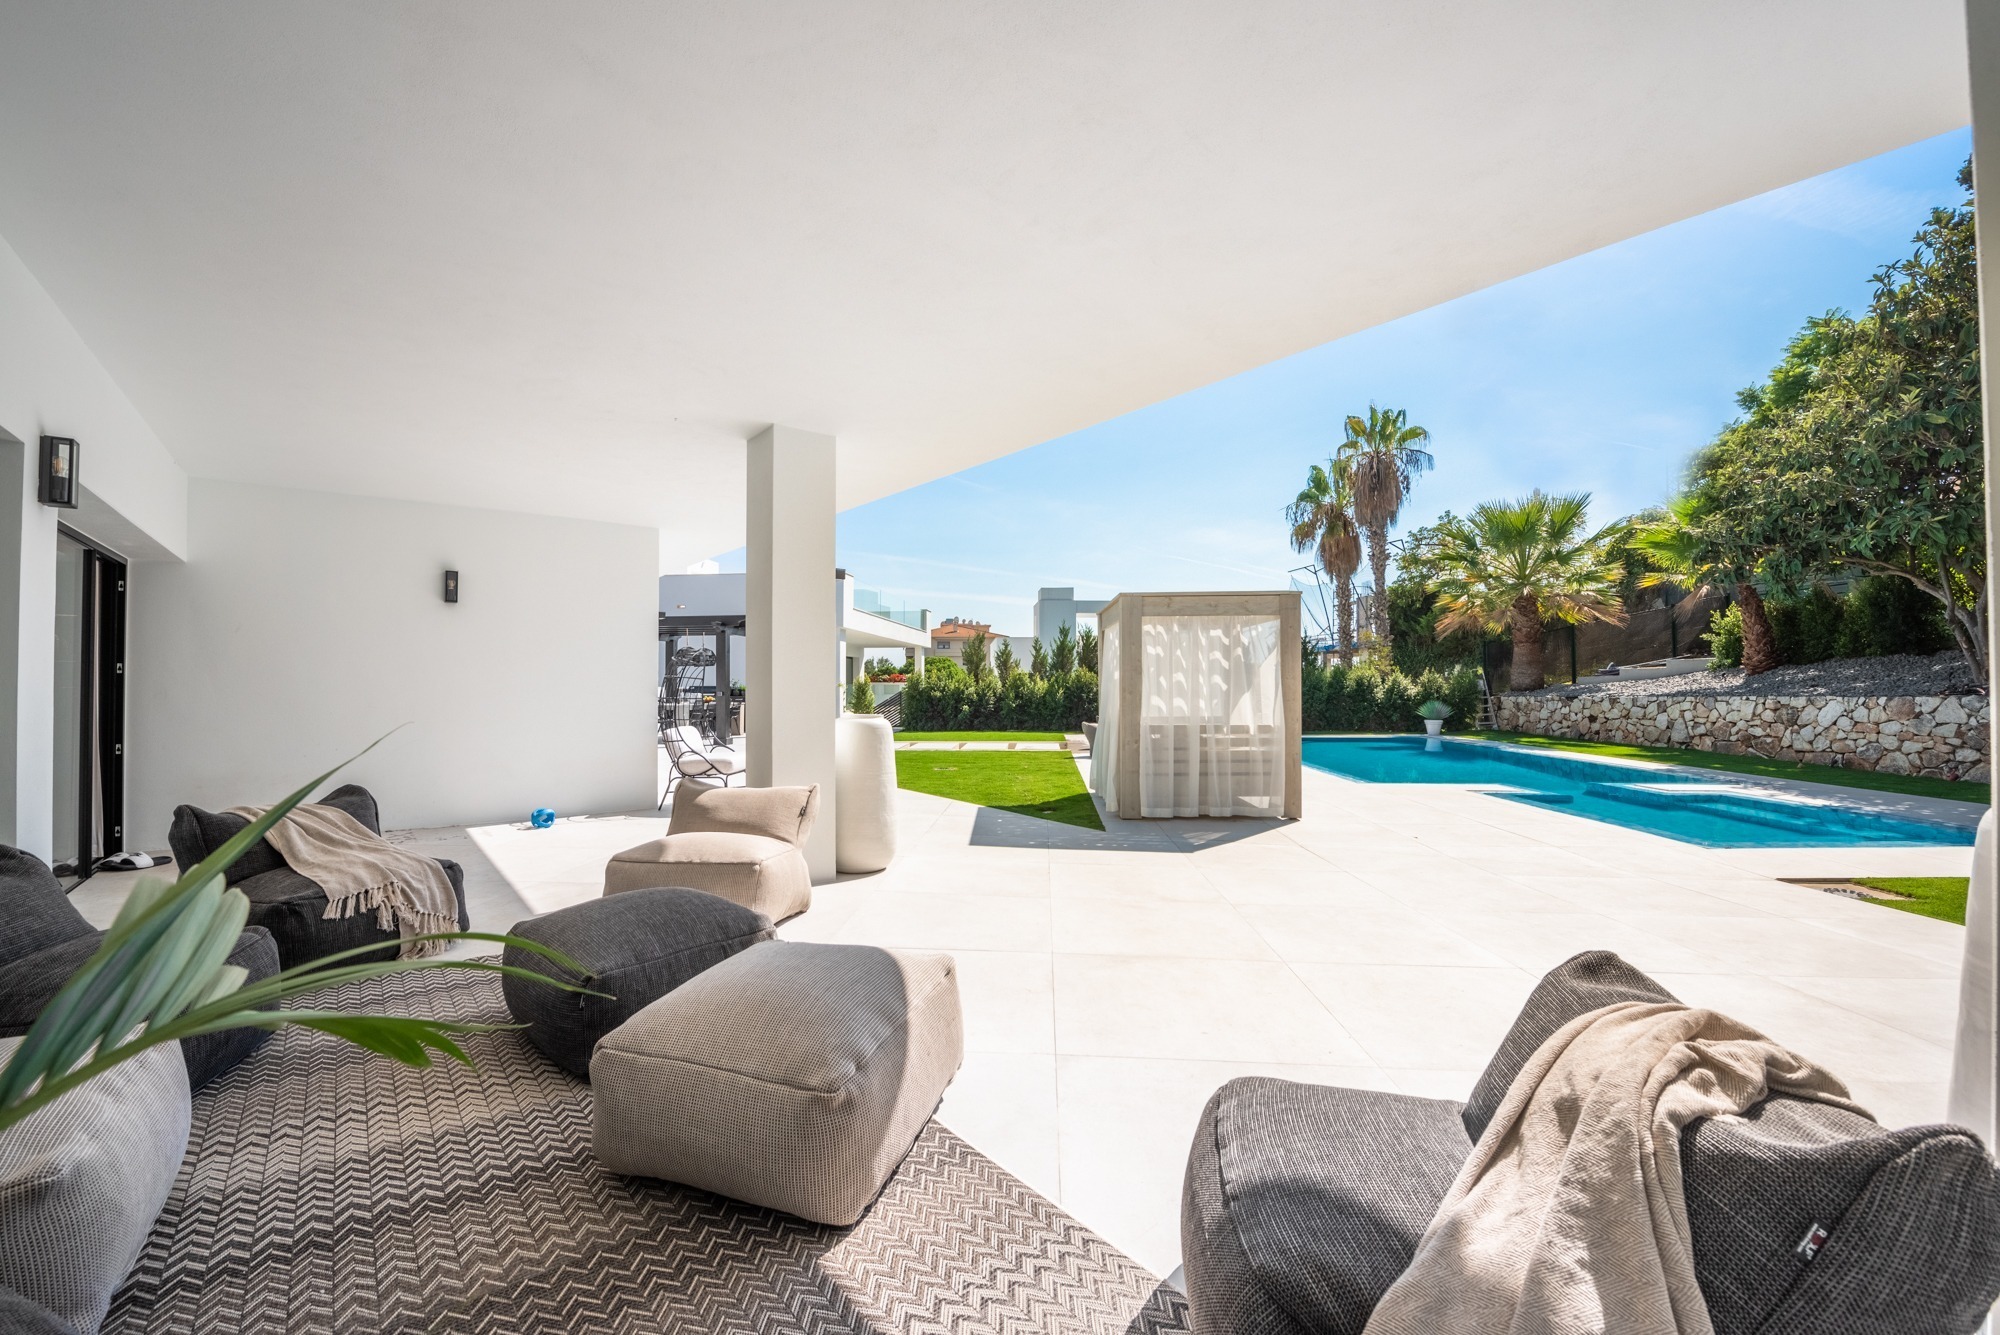 Luxurious family villa – Nueva Andalucia real state